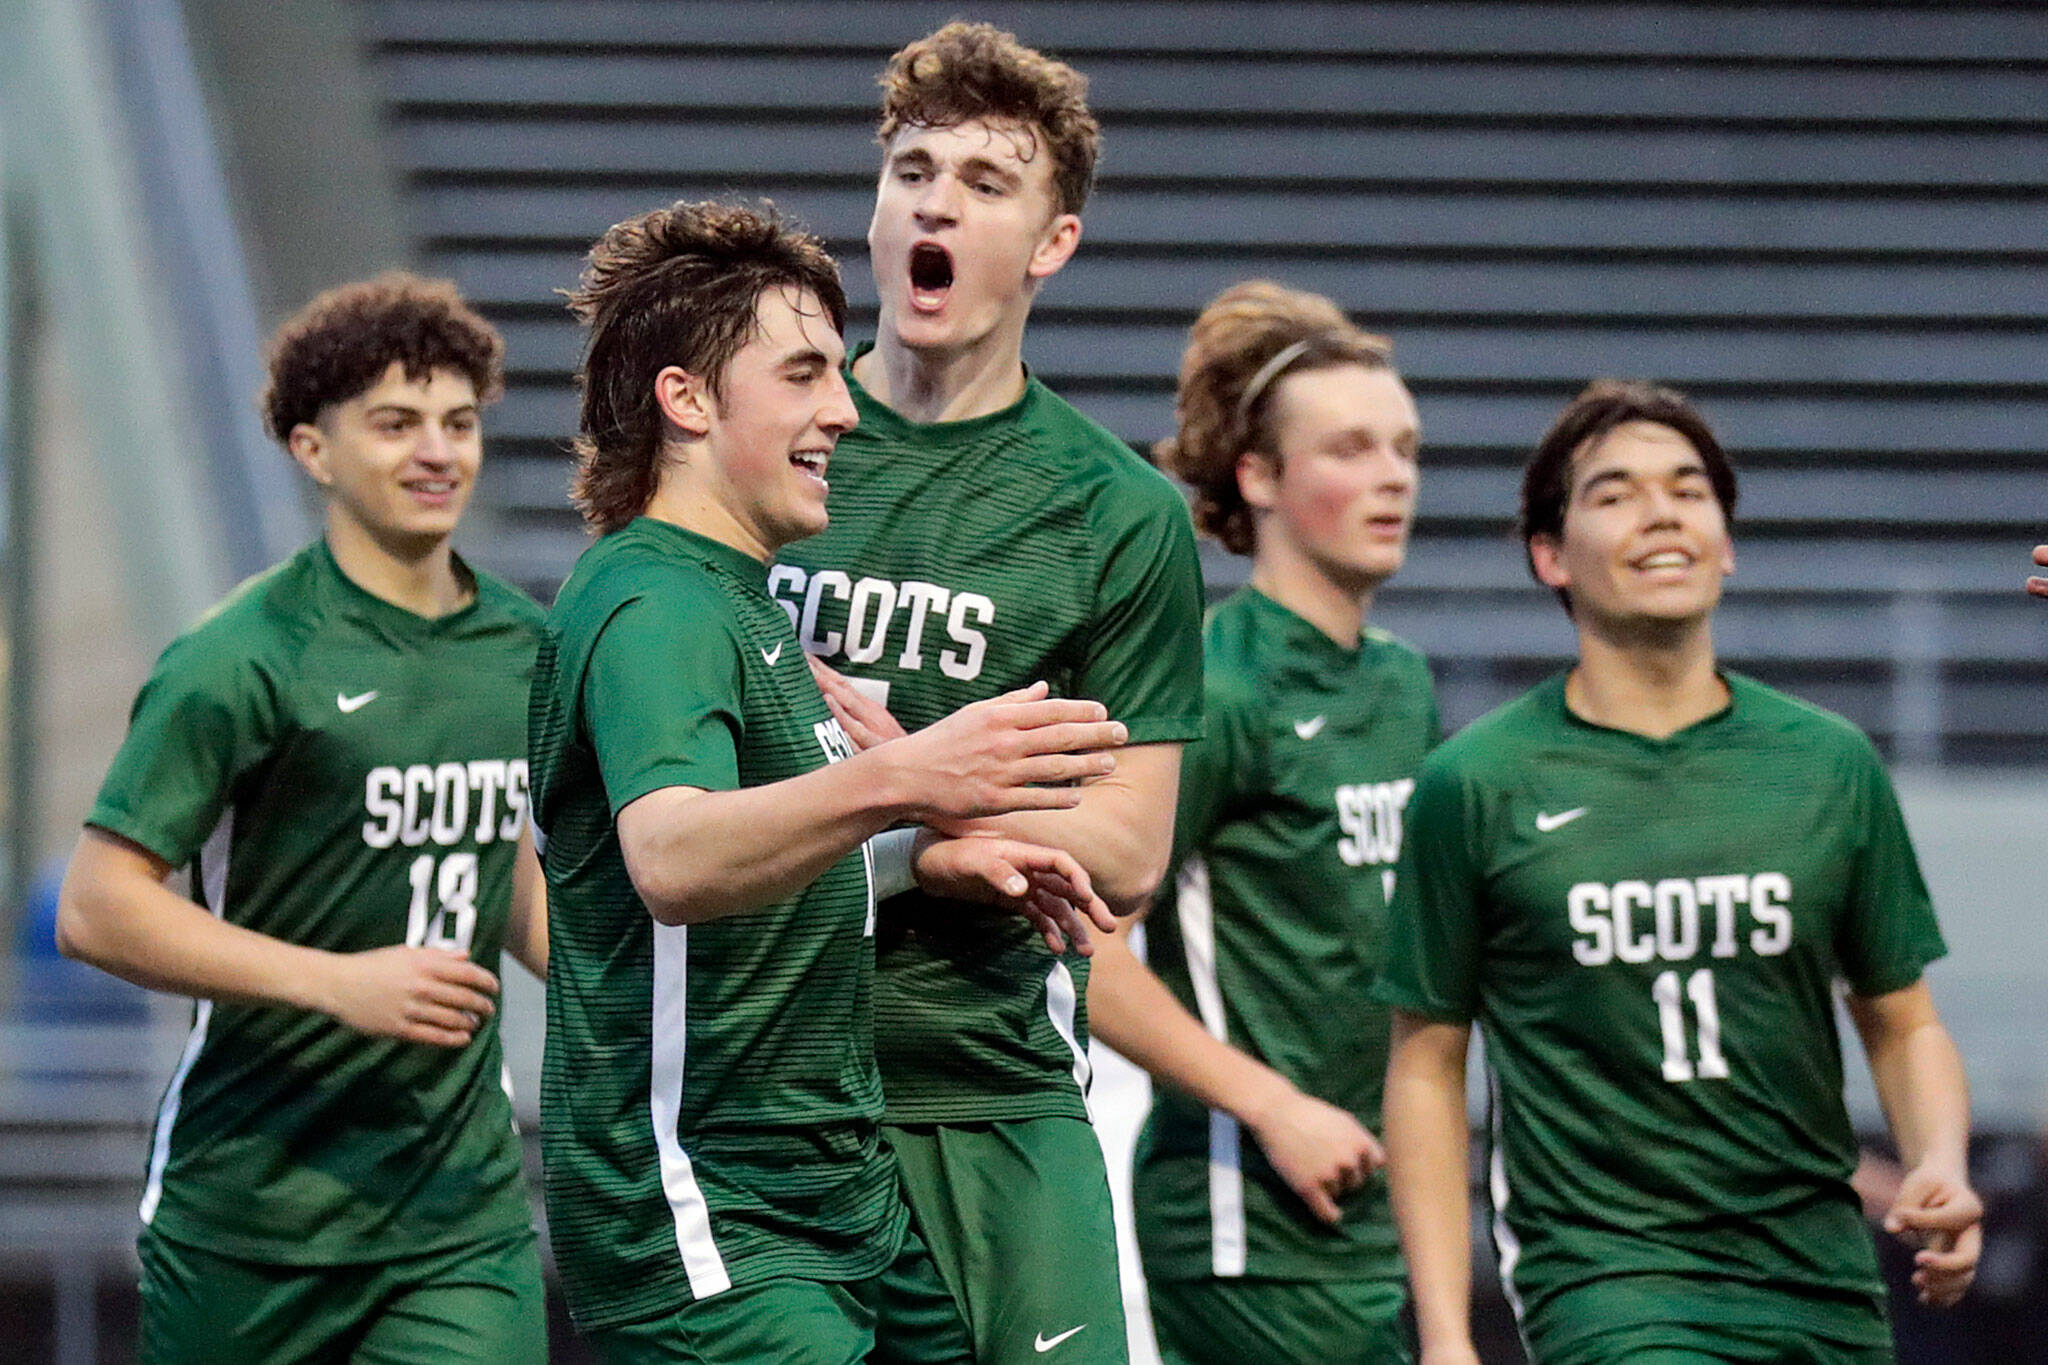 Shorecrest senior Mason Dougherty, front, celebrates a goal with his teammates. The Scots went a perfect 16-0 in the regular season, while outscoring their opponents 60-5. (Kevin Clark / The Herald)